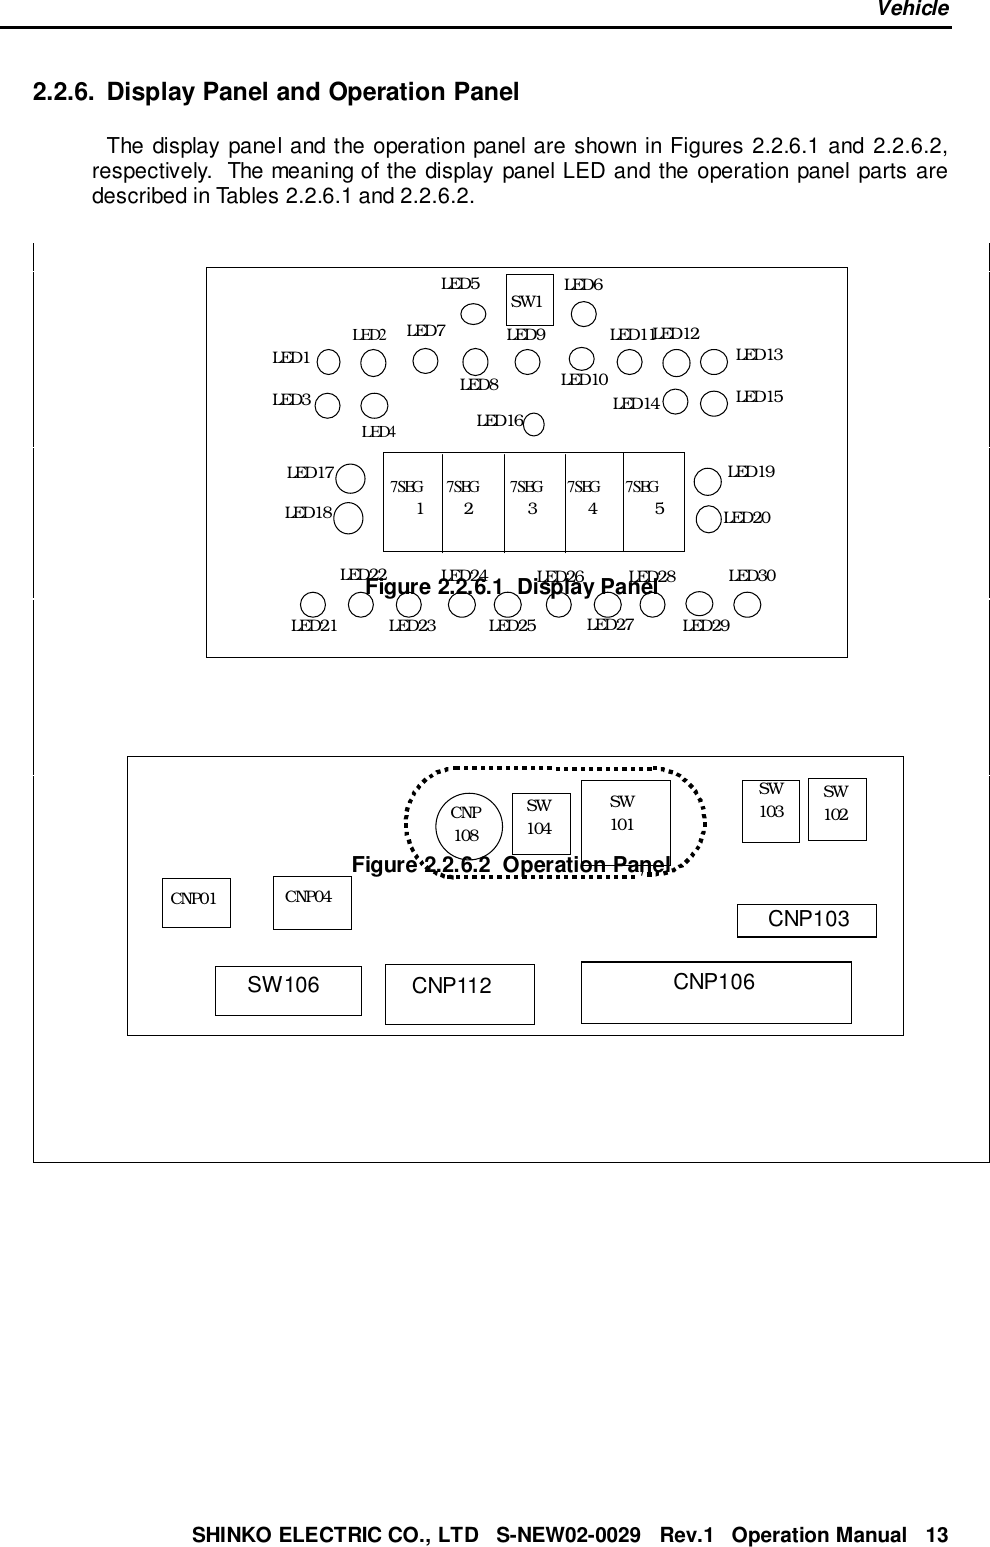 VehicleSHINKO ELECTRIC CO., LTD   S-NEW02-0029   Rev.1   Operation Manual   132.2.6.  Display Panel and Operation PanelThe display panel and the operation panel are shown in Figures 2.2.6.1 and 2.2.6.2,respectively.  The meaning of the display panel LED and the operation panel parts aredescribed in Tables 2.2.6.1 and 2.2.6.2.Figure 2.2.6.1  Display PanelFigure 2.2.6.2  Operation PanelLED1LED2LED3LED4LED5 LED6LED7LED8LED9LED10LED11LED12LED13LED14 LED15LED16LED17LED18LED19LED20LED21LED22LED23LED24LED25LED26LED27LED28LED29LED30SW1   7SEG2  7SEG3  7SEG4  7SEG5  7SEG1SW106SW104SW103 SW102SW101CNP112CNP108CNP103CNP106CNP04CNP01